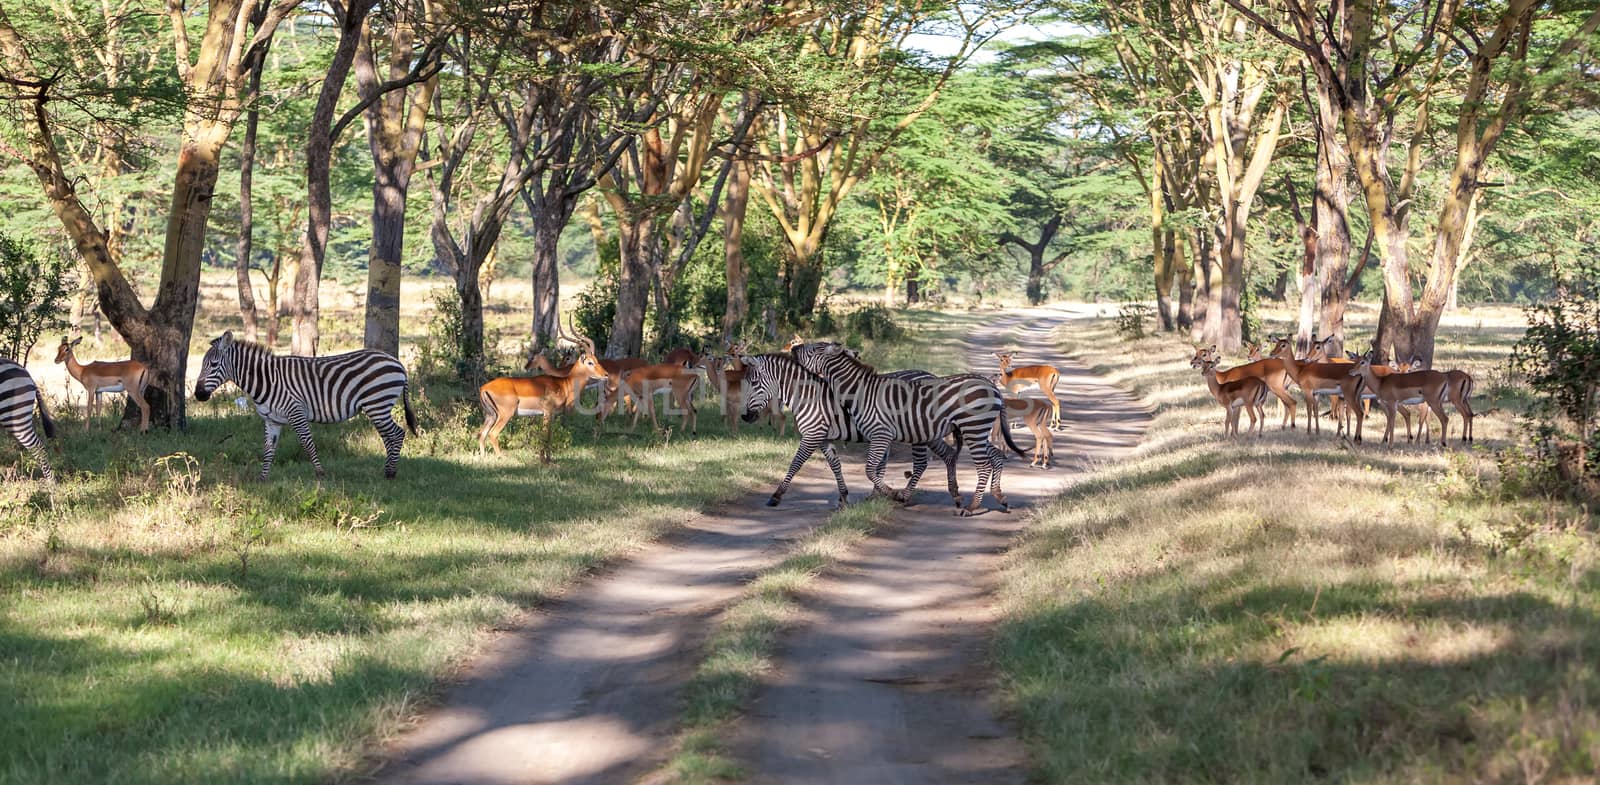 antelopes and zebras on a background of road  by master1305